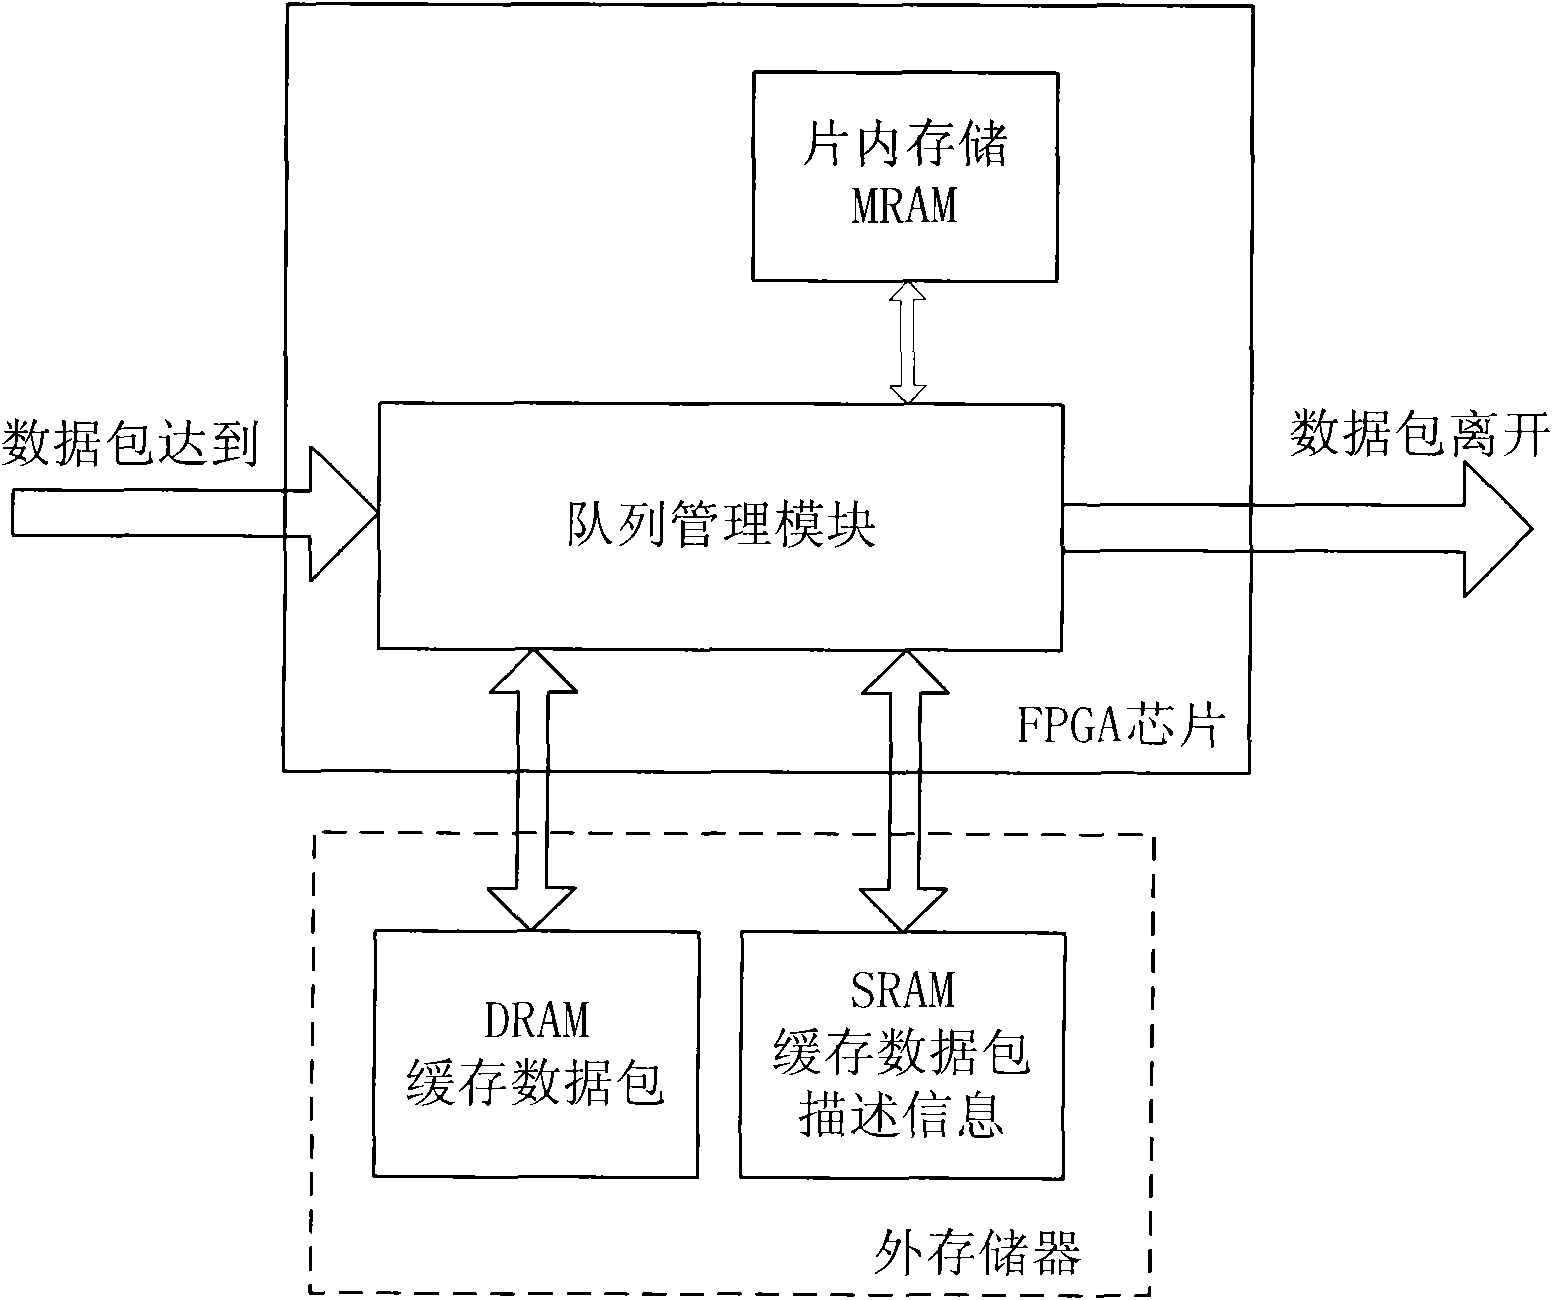 Method for queue buffer management in linked list-based switched network